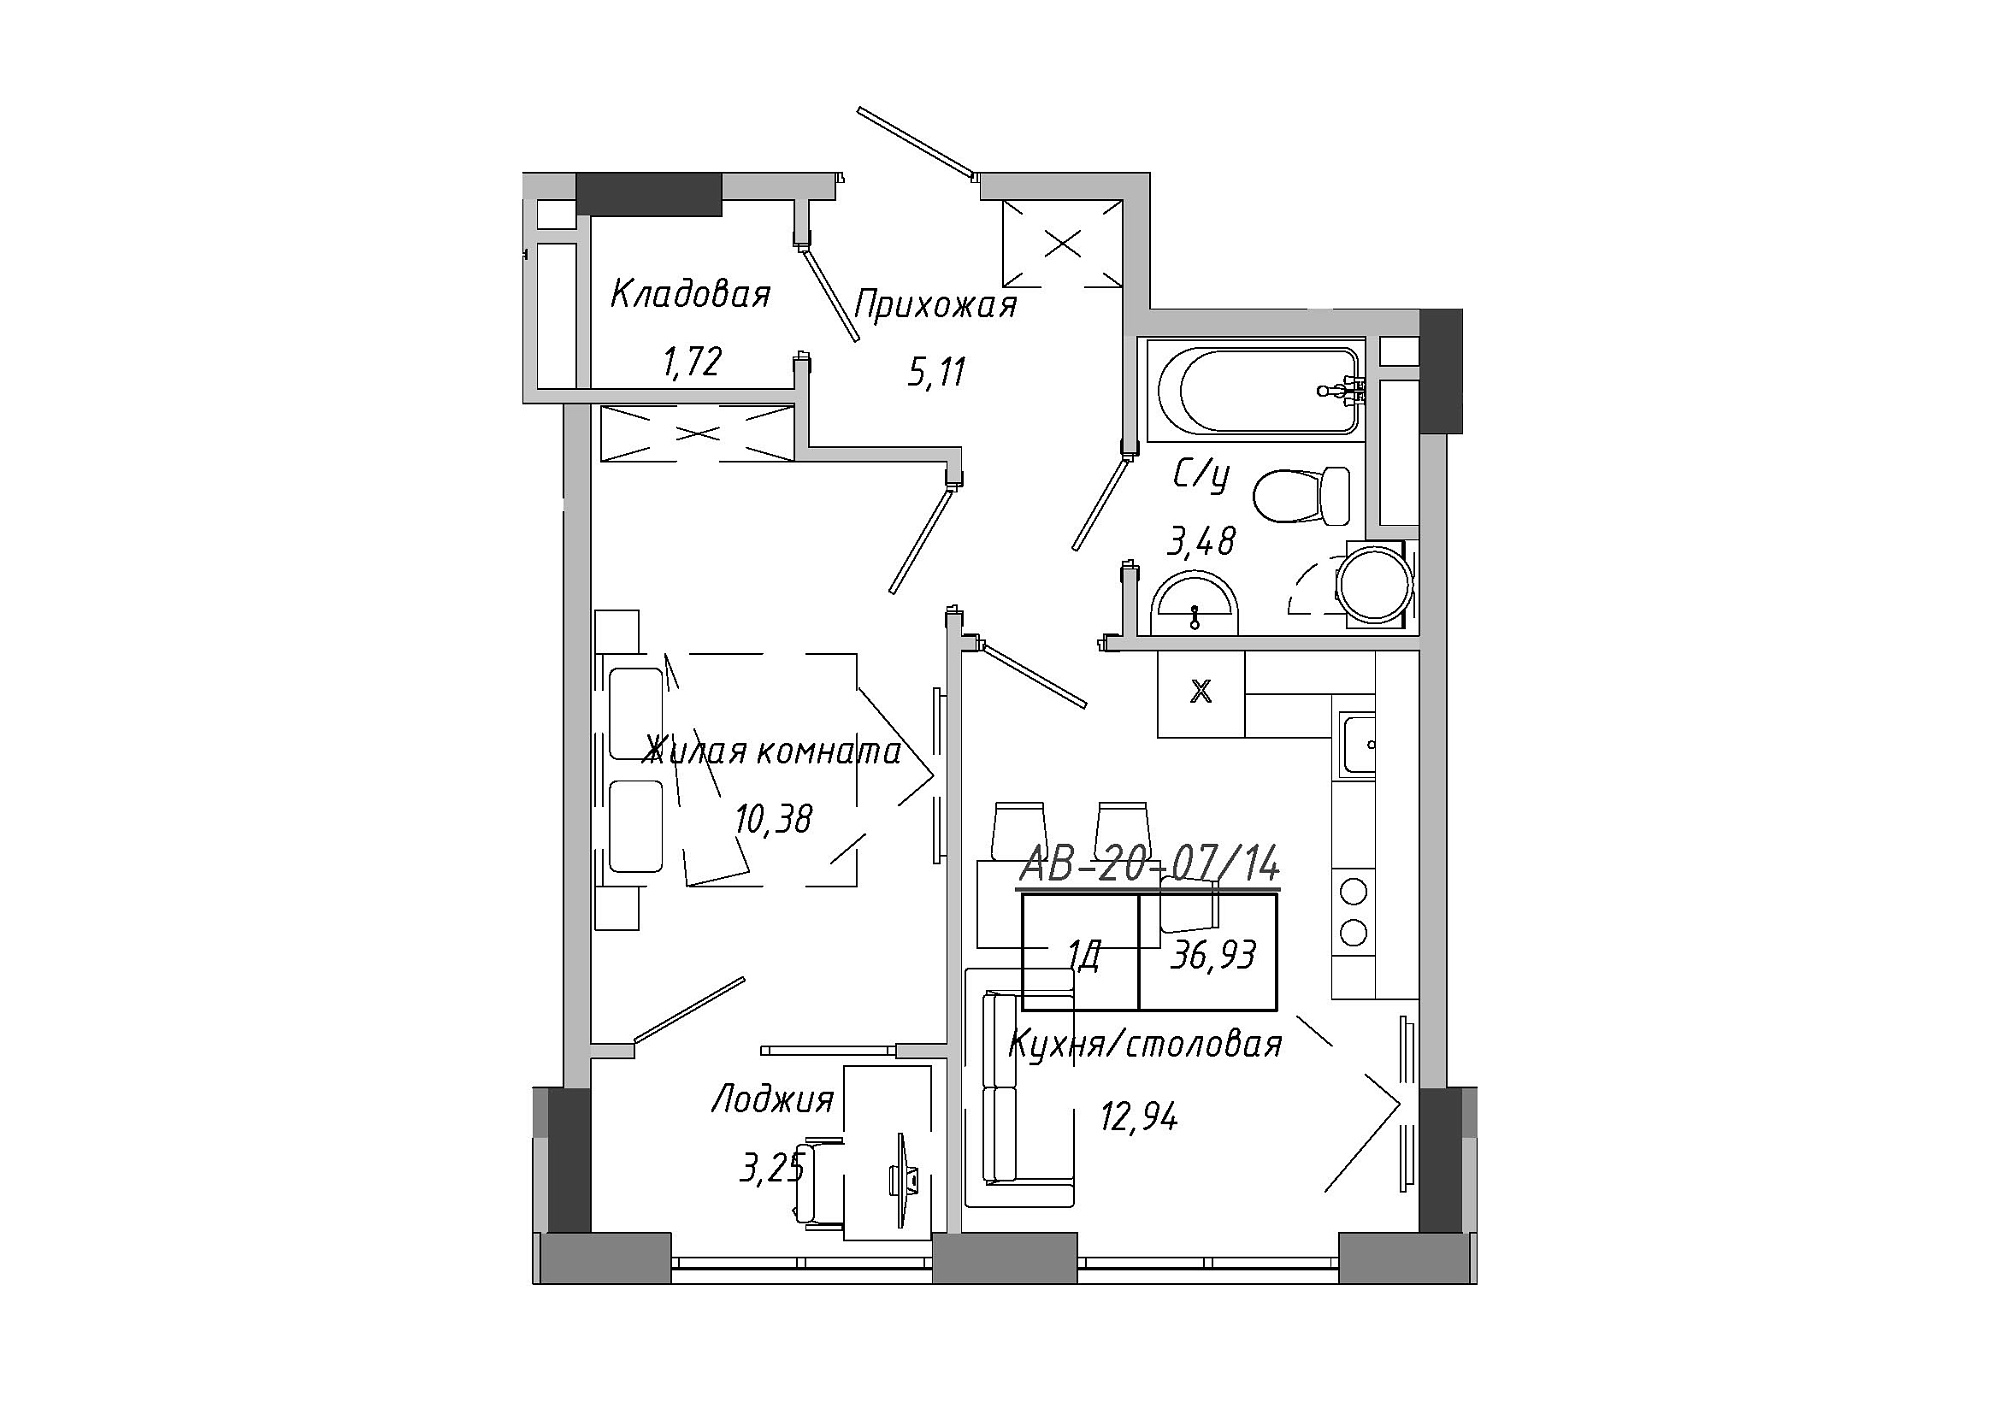 Planning 1-rm flats area 36.96m2, AB-20-07/00014.